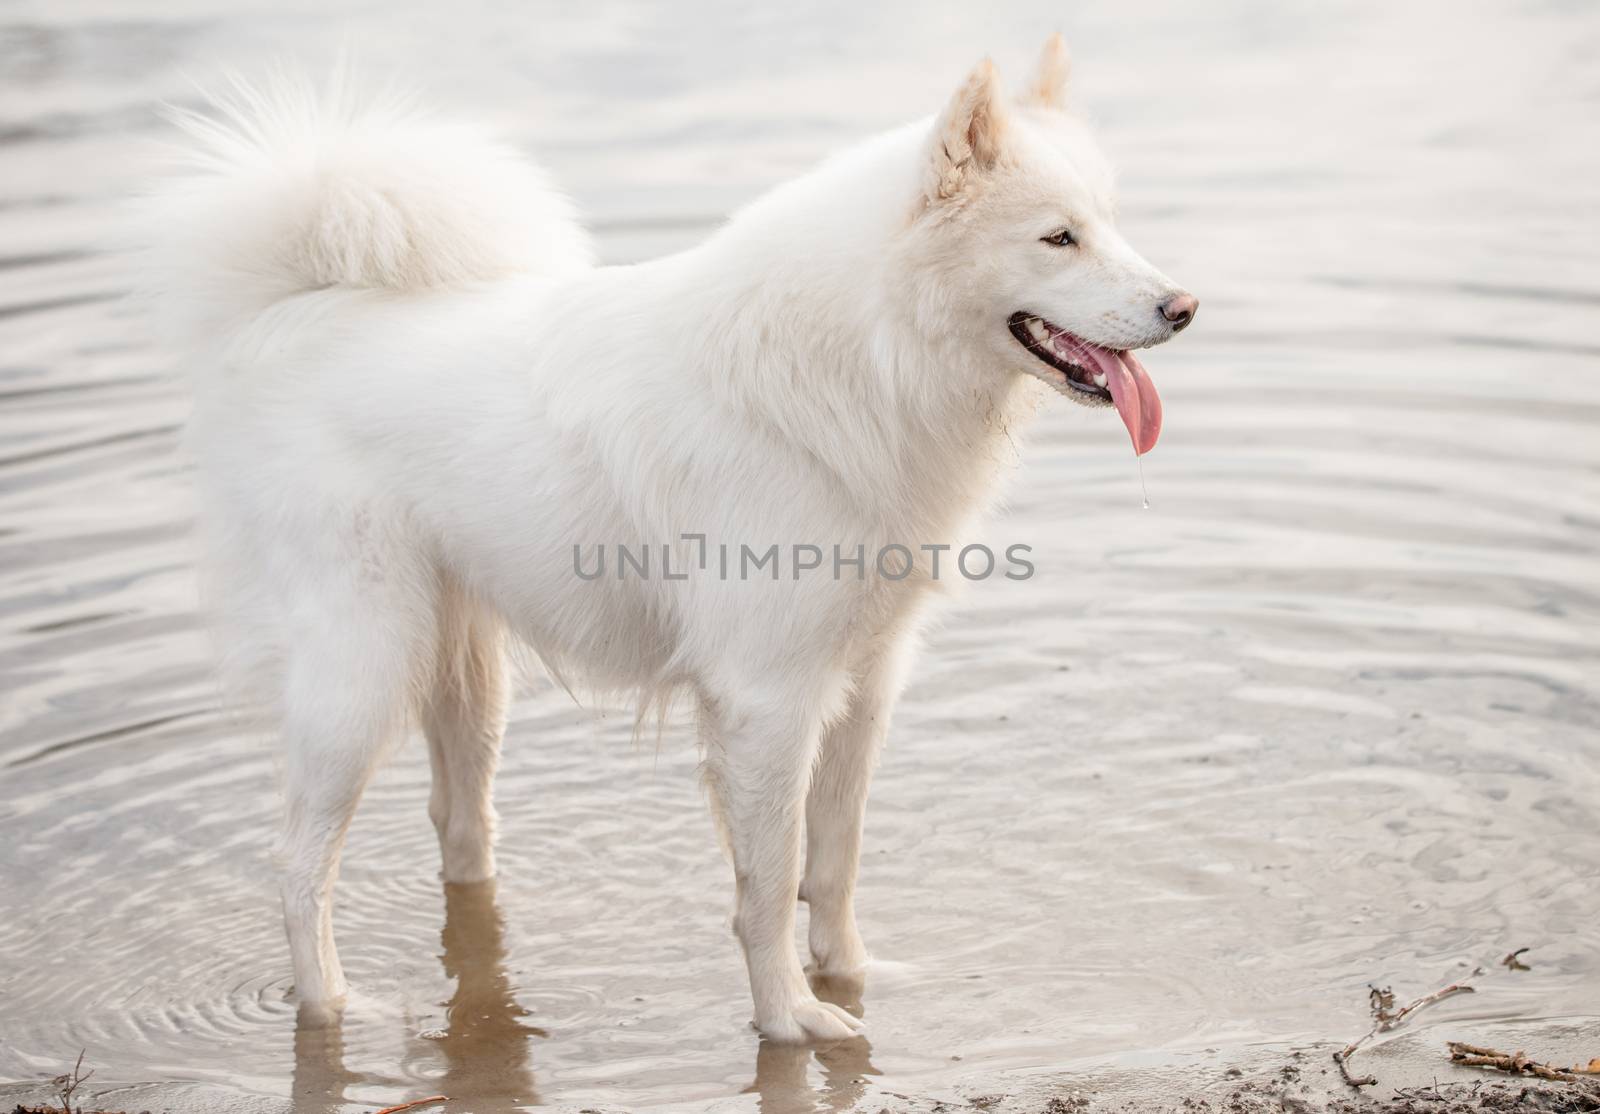 Cute, fluffy white Samoyed dog standing at the water's edge at a dog park